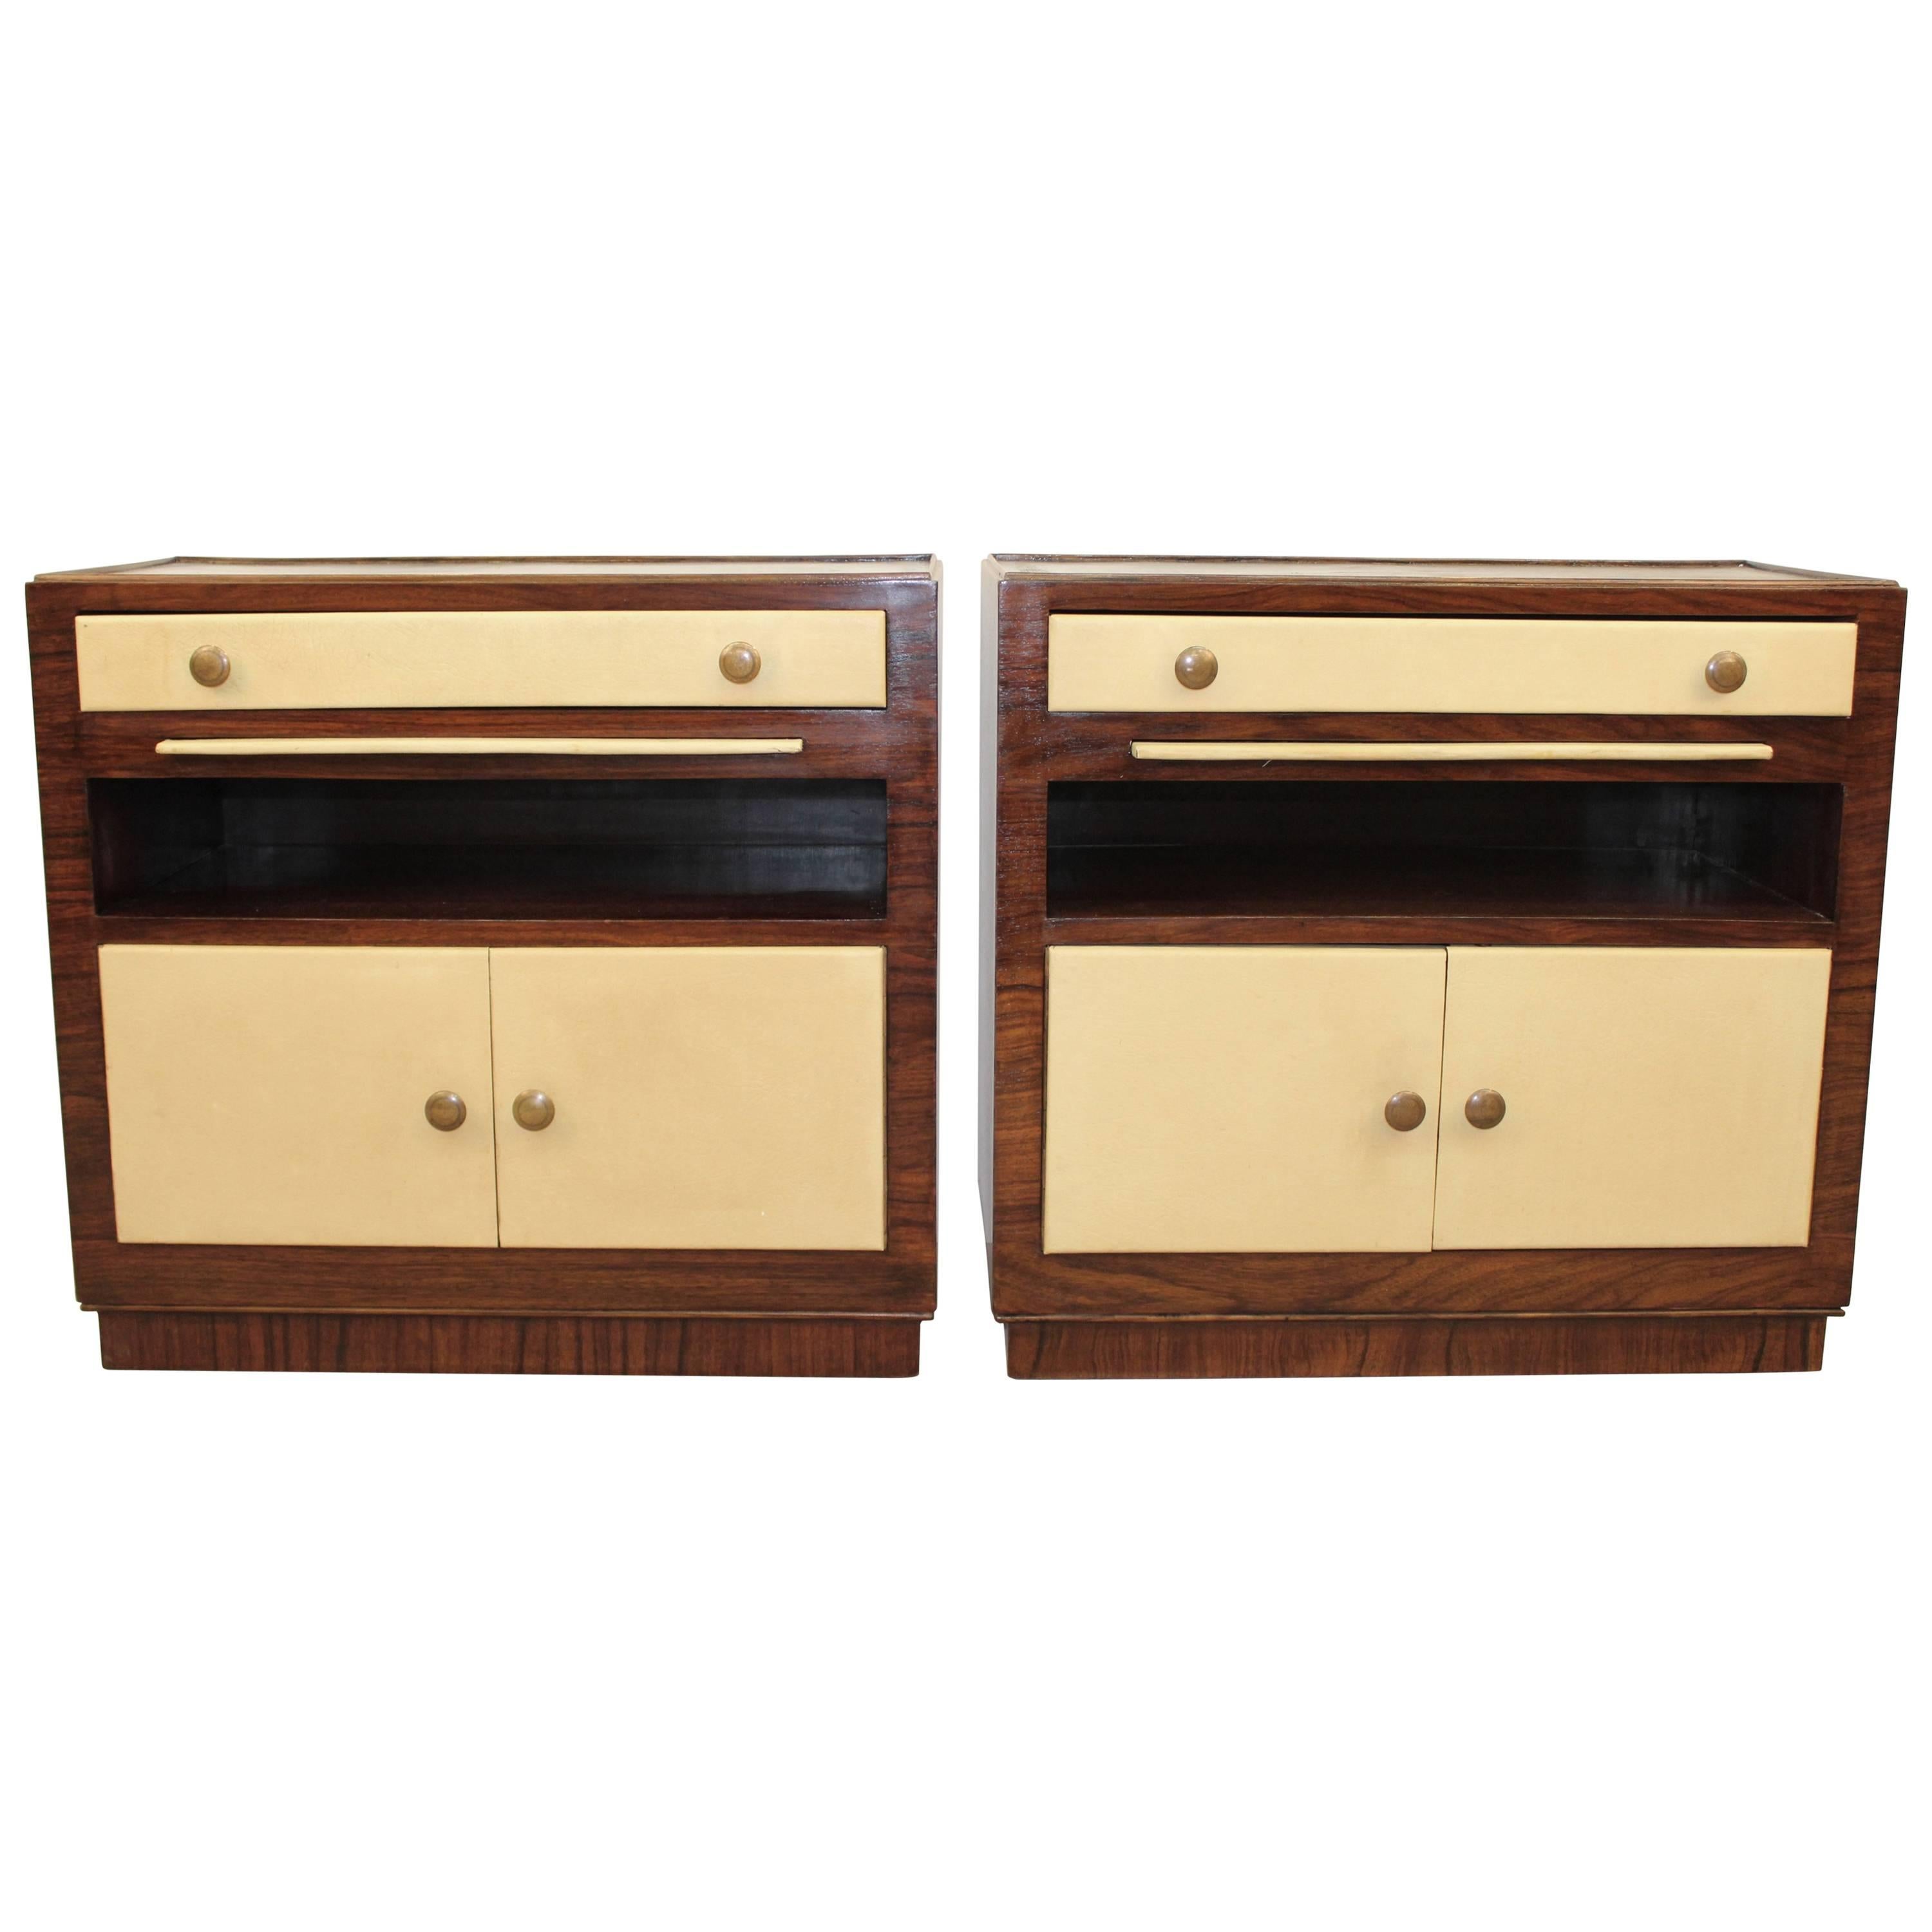 A pair of Art Deco era nightstands, European in origin, each with ivory toned leather front single drawer on two-door cabinets against rosewood frames with brass pulls and marble tops. Excellent vintage condition, with age appropriate wear.

110074